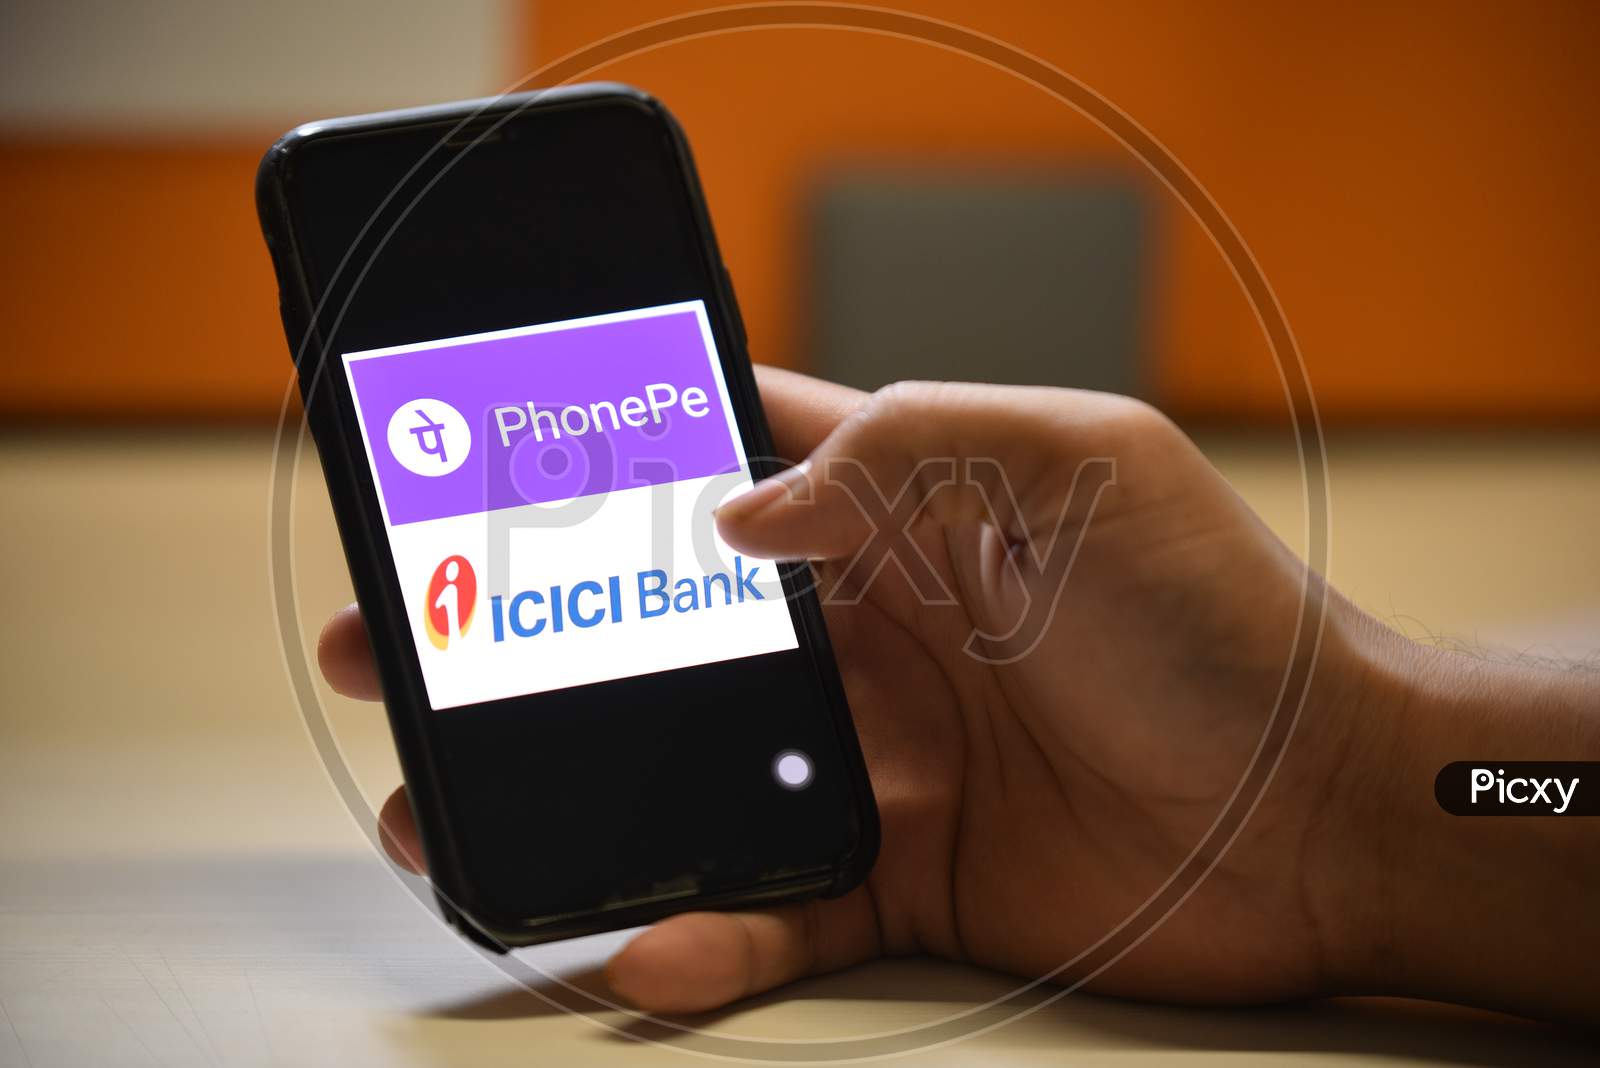 Phonepe now switch to ICICI Bank for UPI transactions after YES Bank Moratorium by RBI